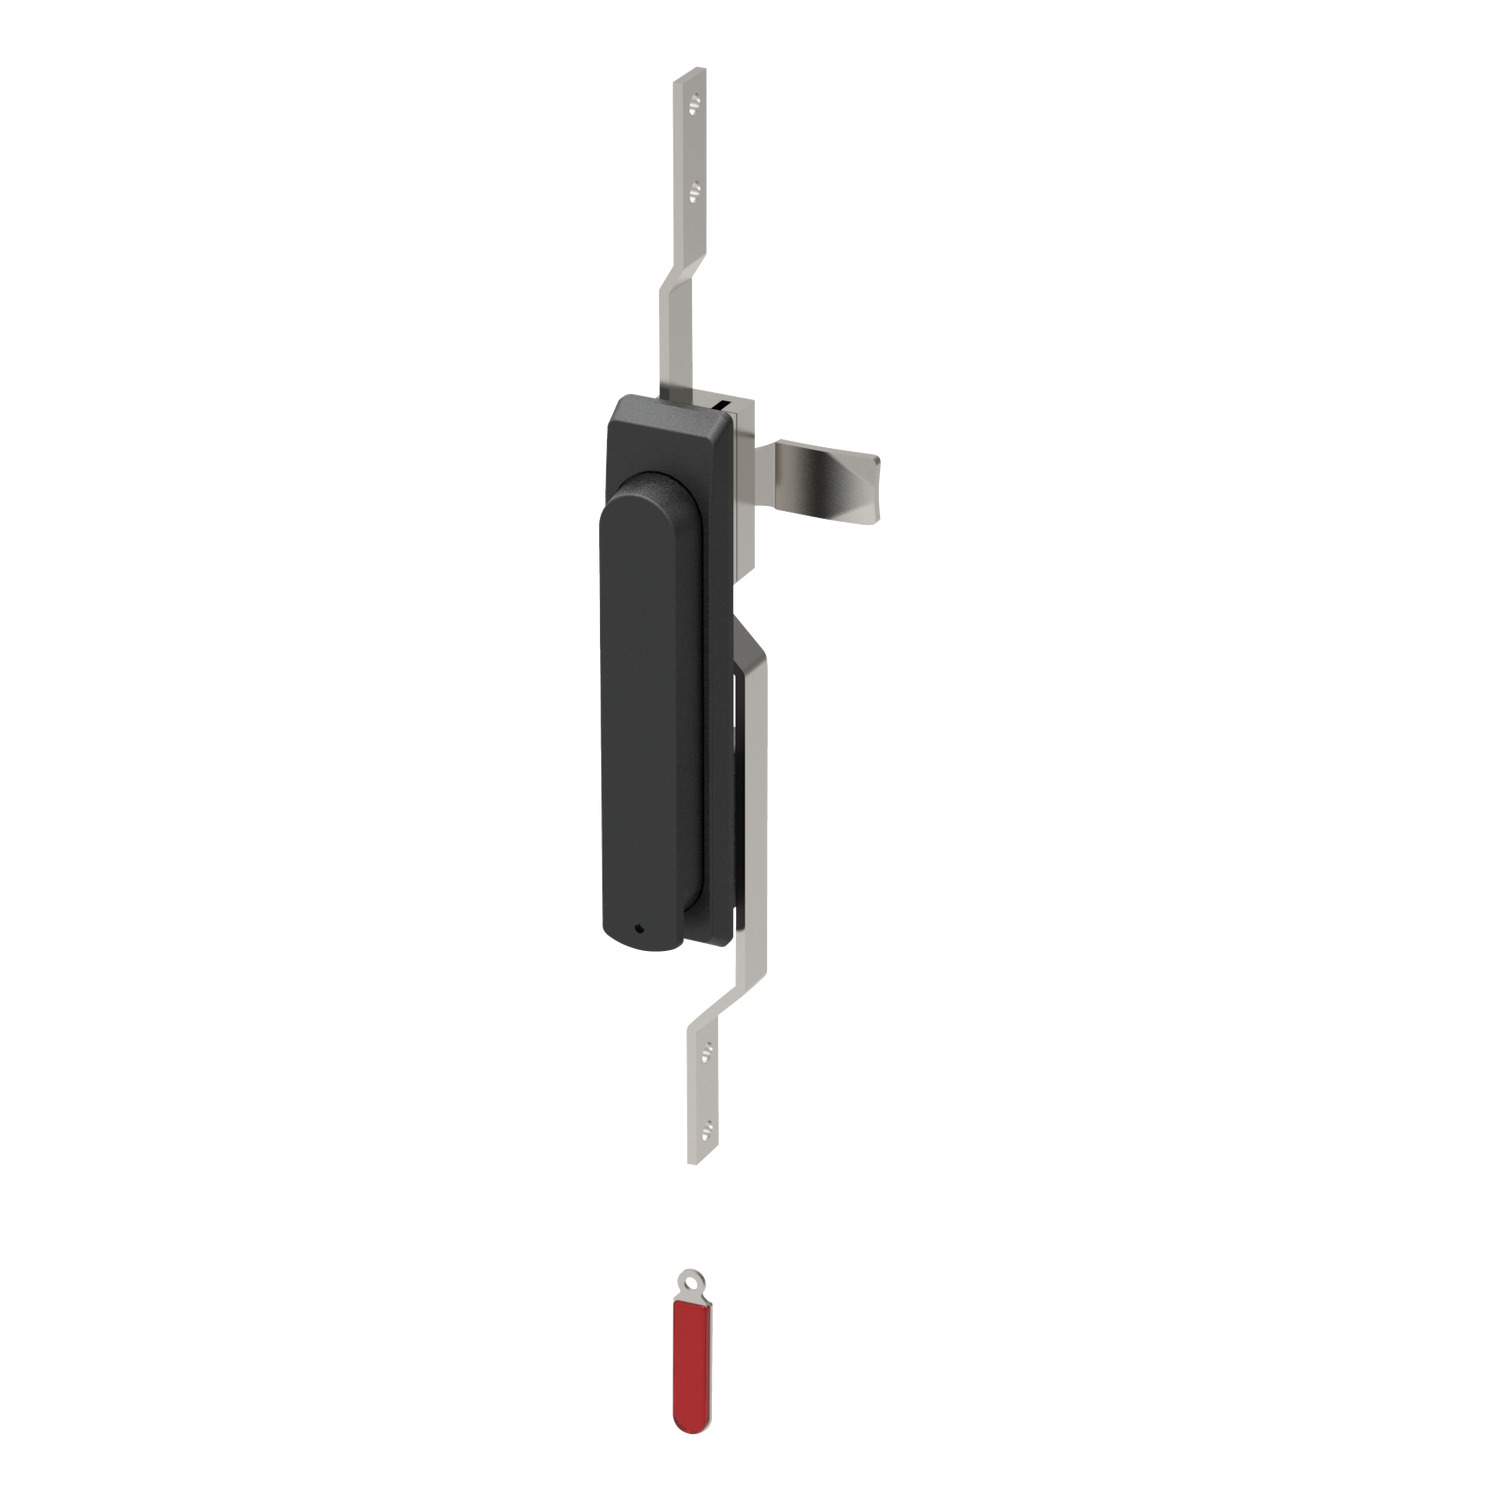 Swing Handles - with Rod Control The use of a magnetic key means that the possibility of material ingress is eliminated, as there is no key cavity. This swing handle can provide one, two or three point 